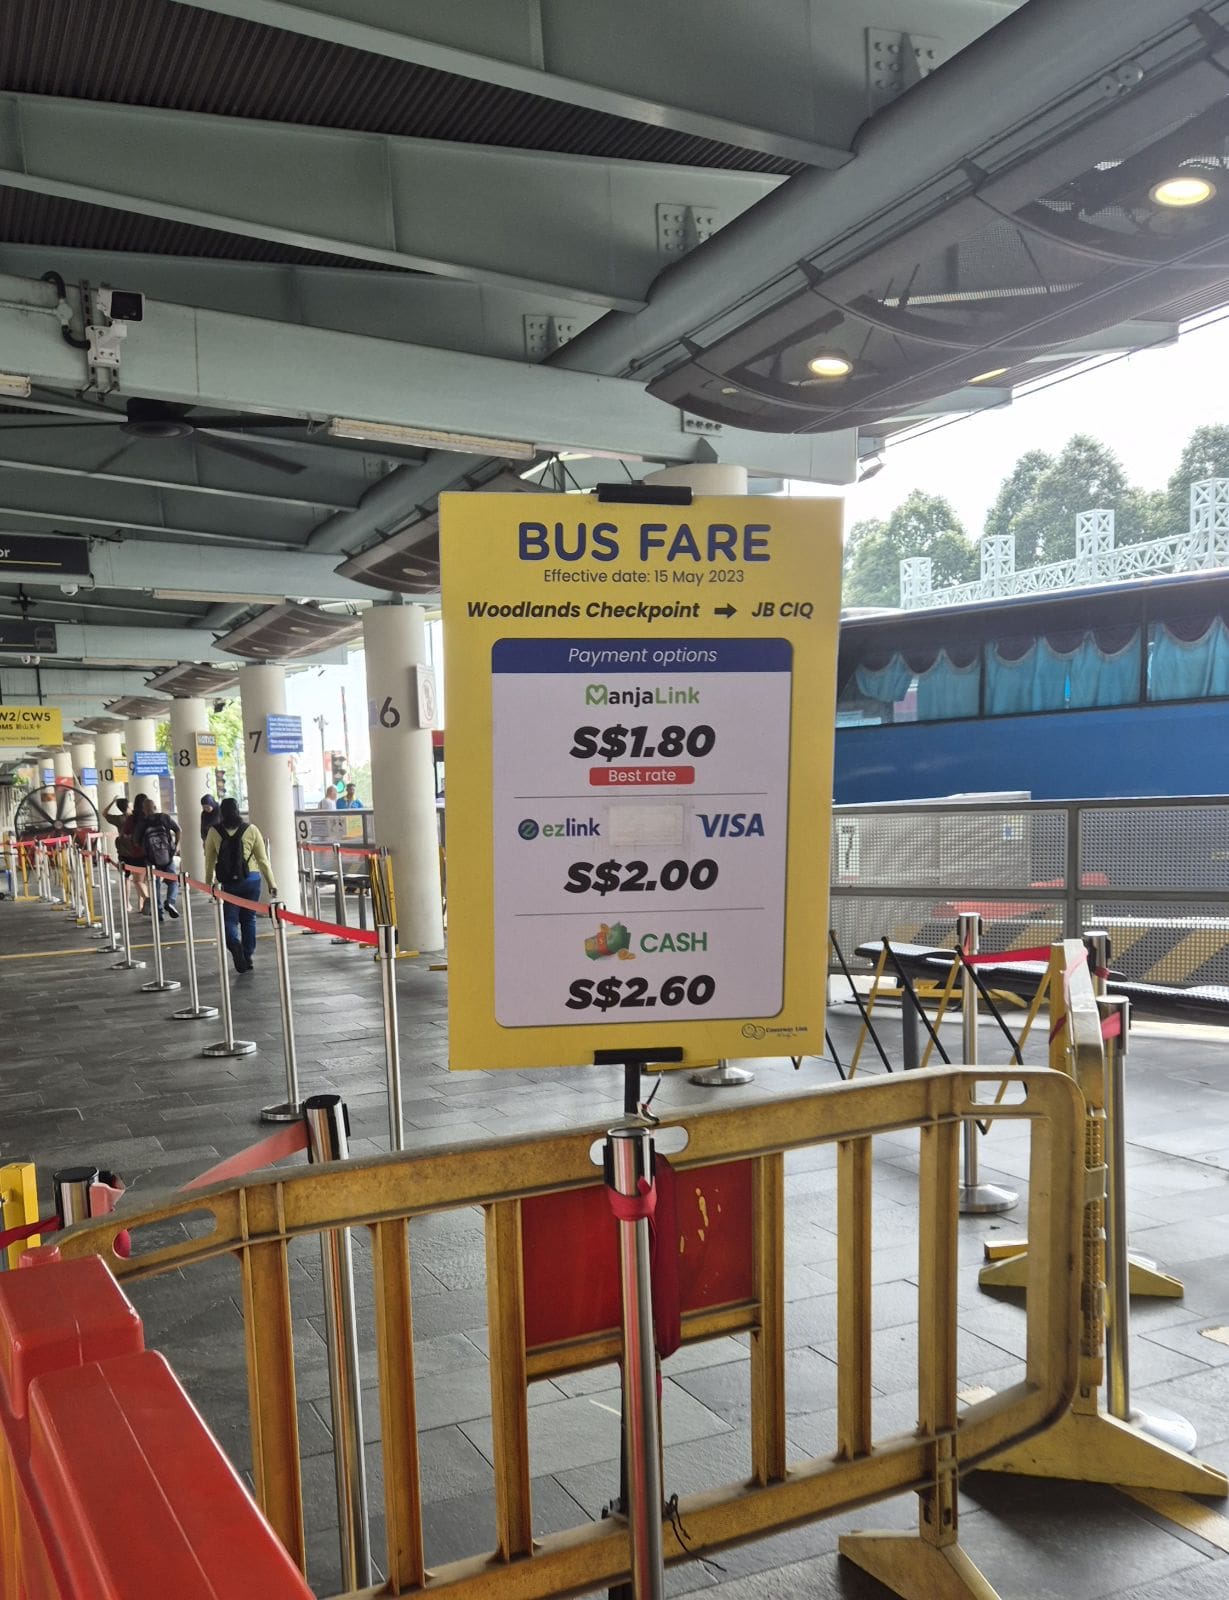 Bus fare for the Causeway Link bus